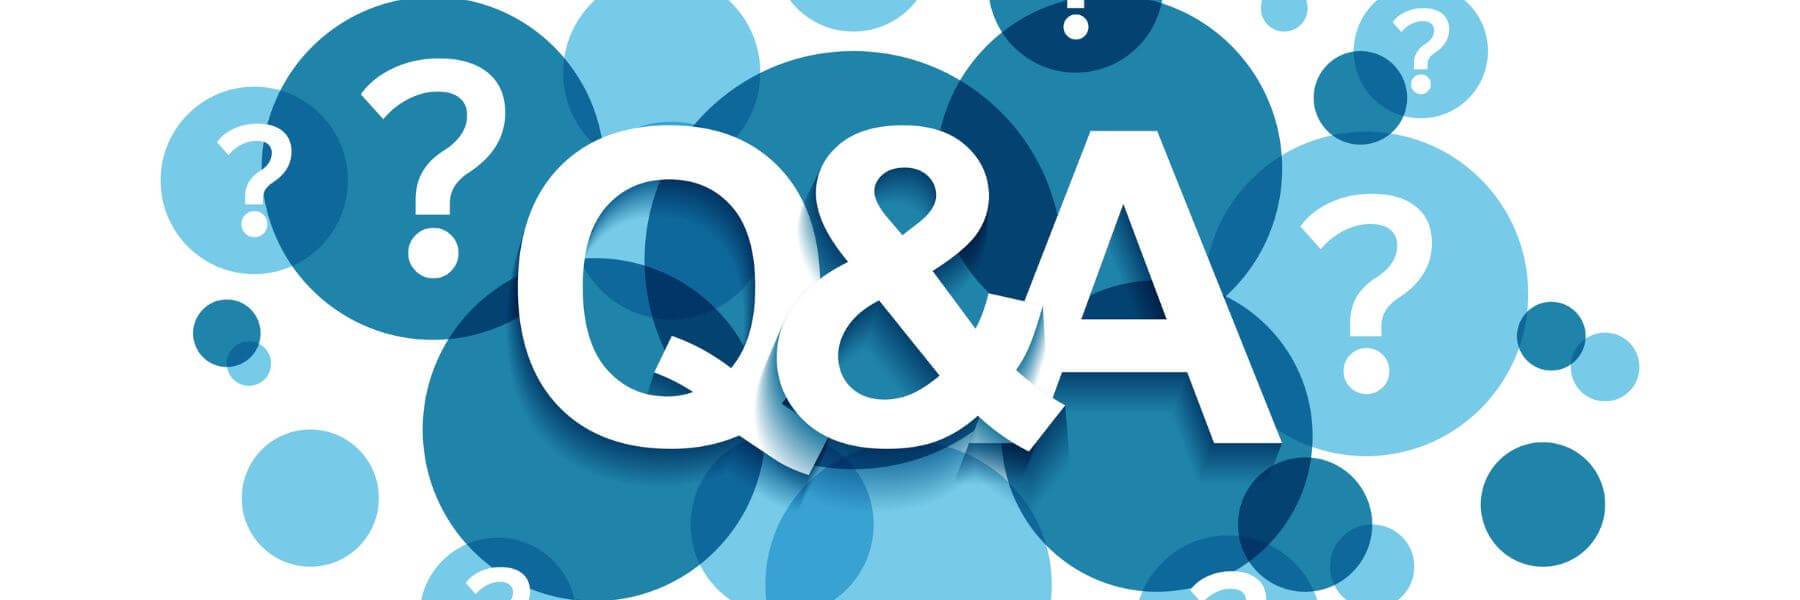 Q&A text over question marks and bubbles